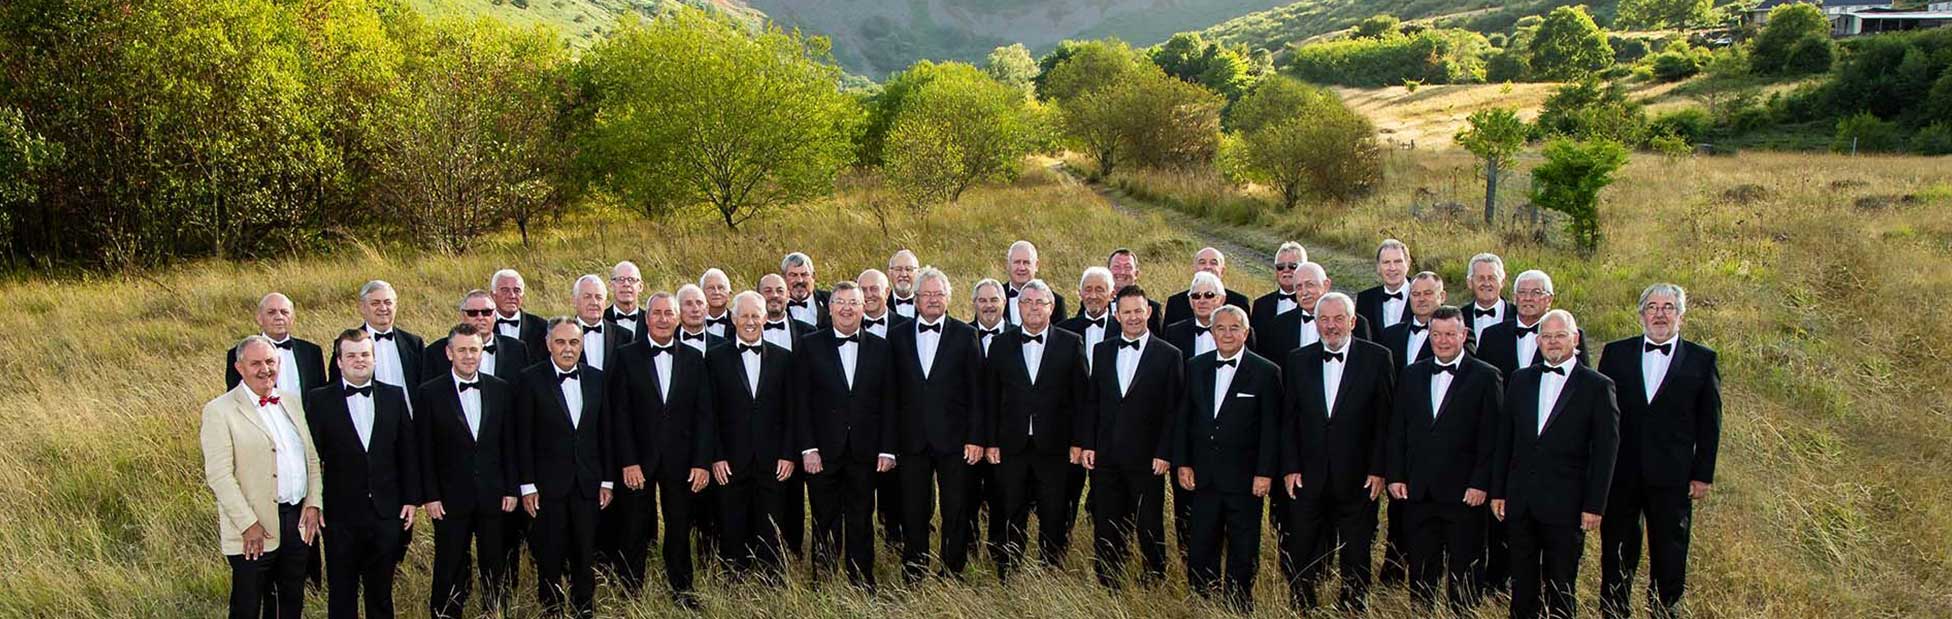 Large group of men in Tuxedos standing in mountains